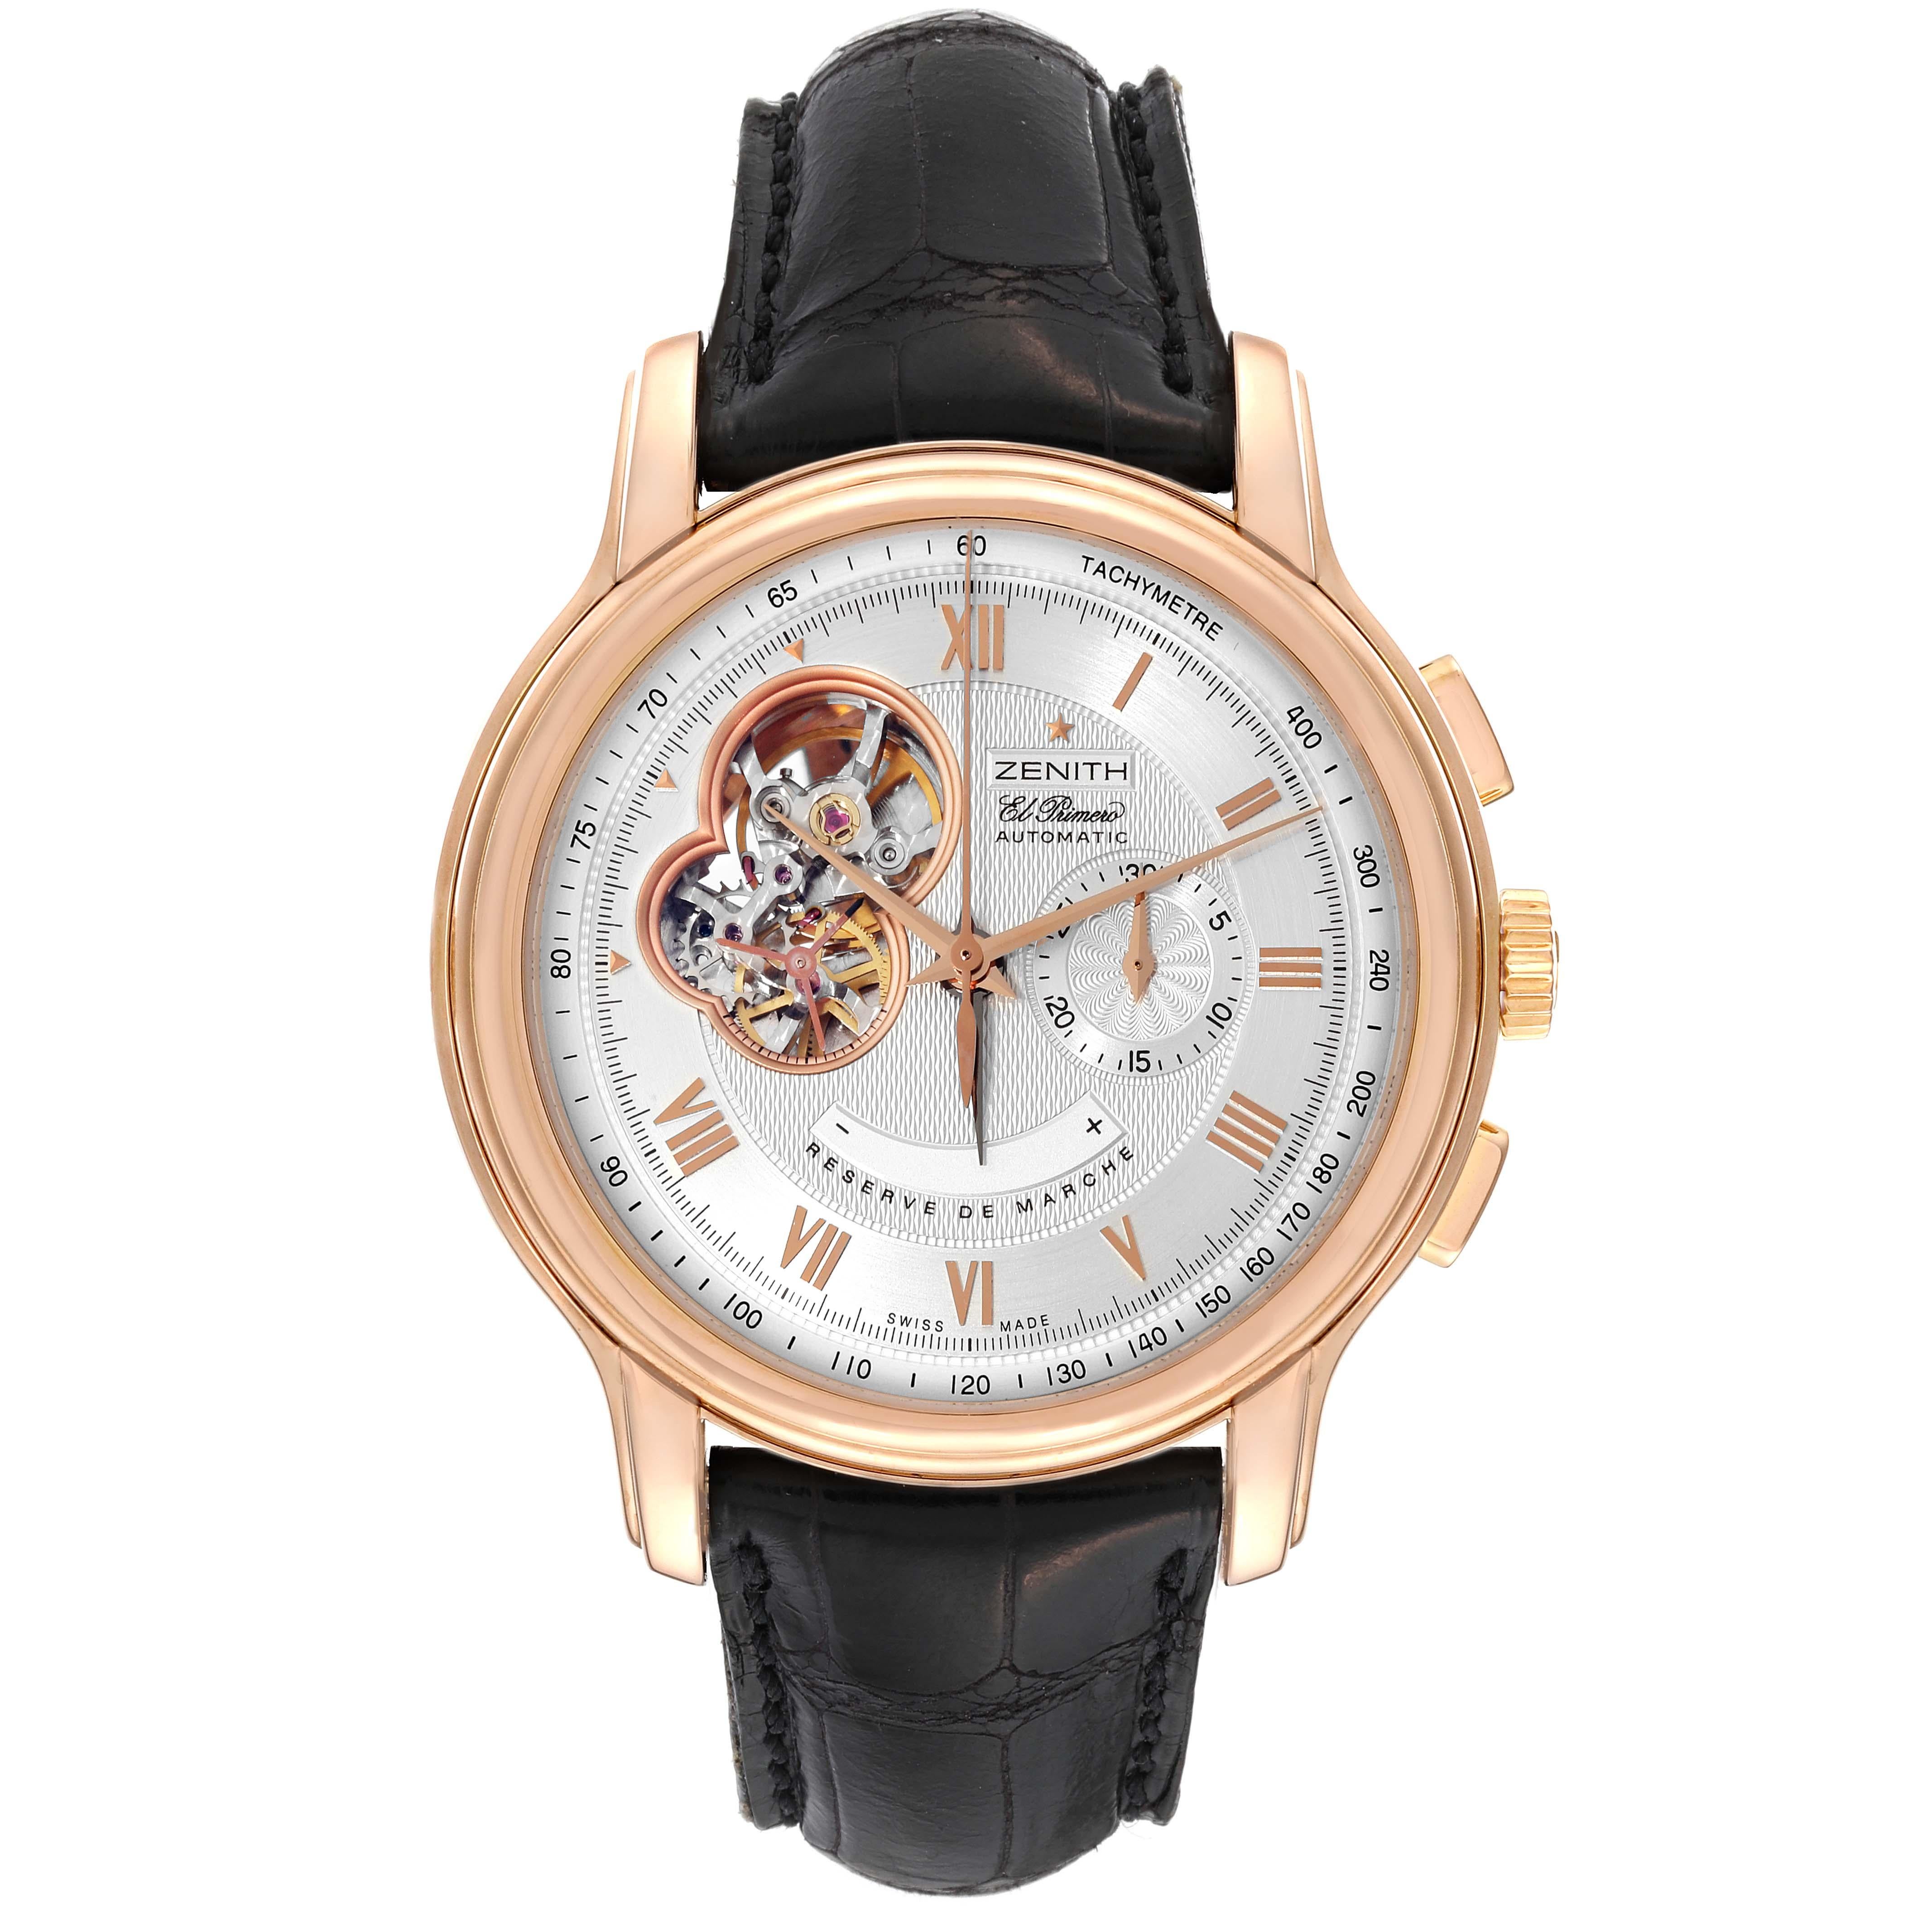 Zenith Chronomaster XXT Open Rose Gold Mens Watch 18.1260.4021 Box Papers. Zenith El Primero automatic self-winding movement . 18k rose gold case 45.0 mm in diameter. Exhibition transparent sapphire crystal case back. 18k rose gold smooth bezel.